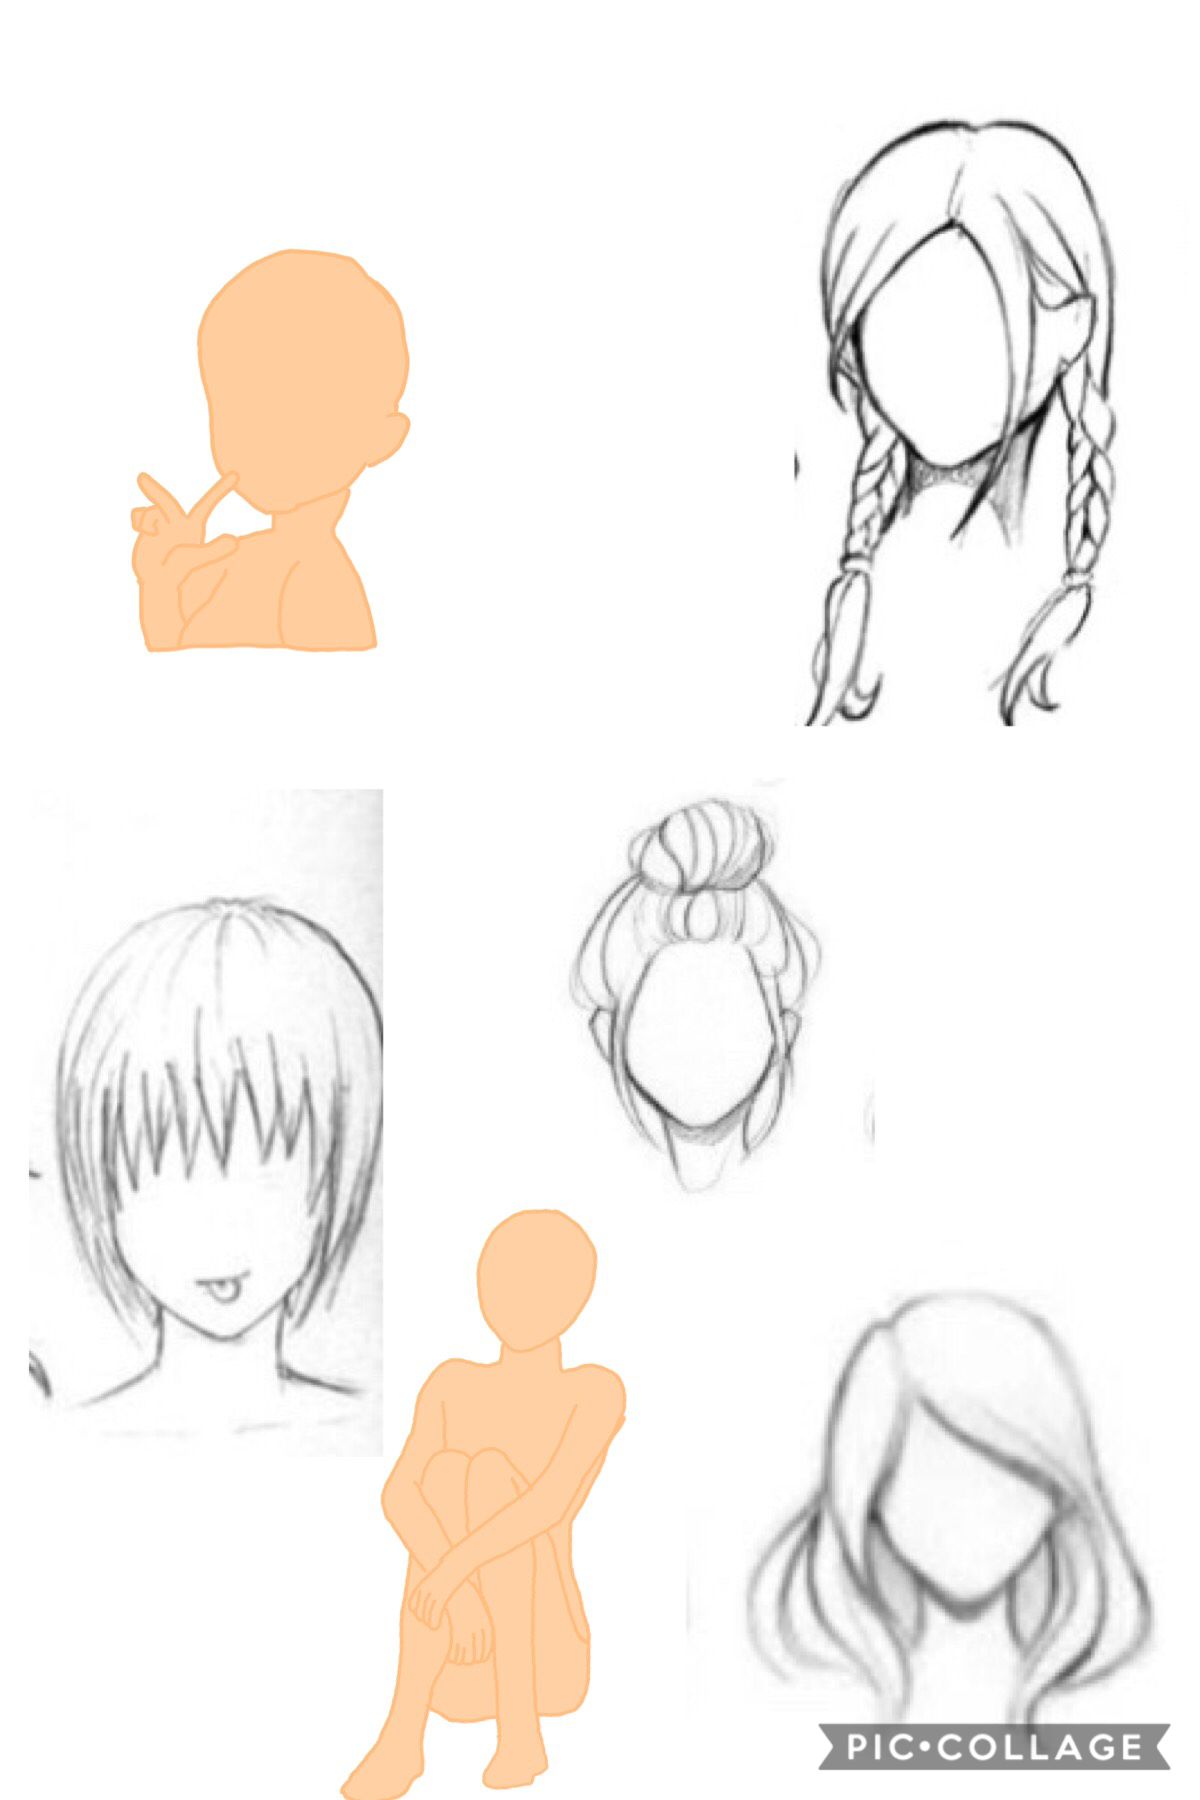 Free hairstyles to use and 2 poses for white, black coming soon!